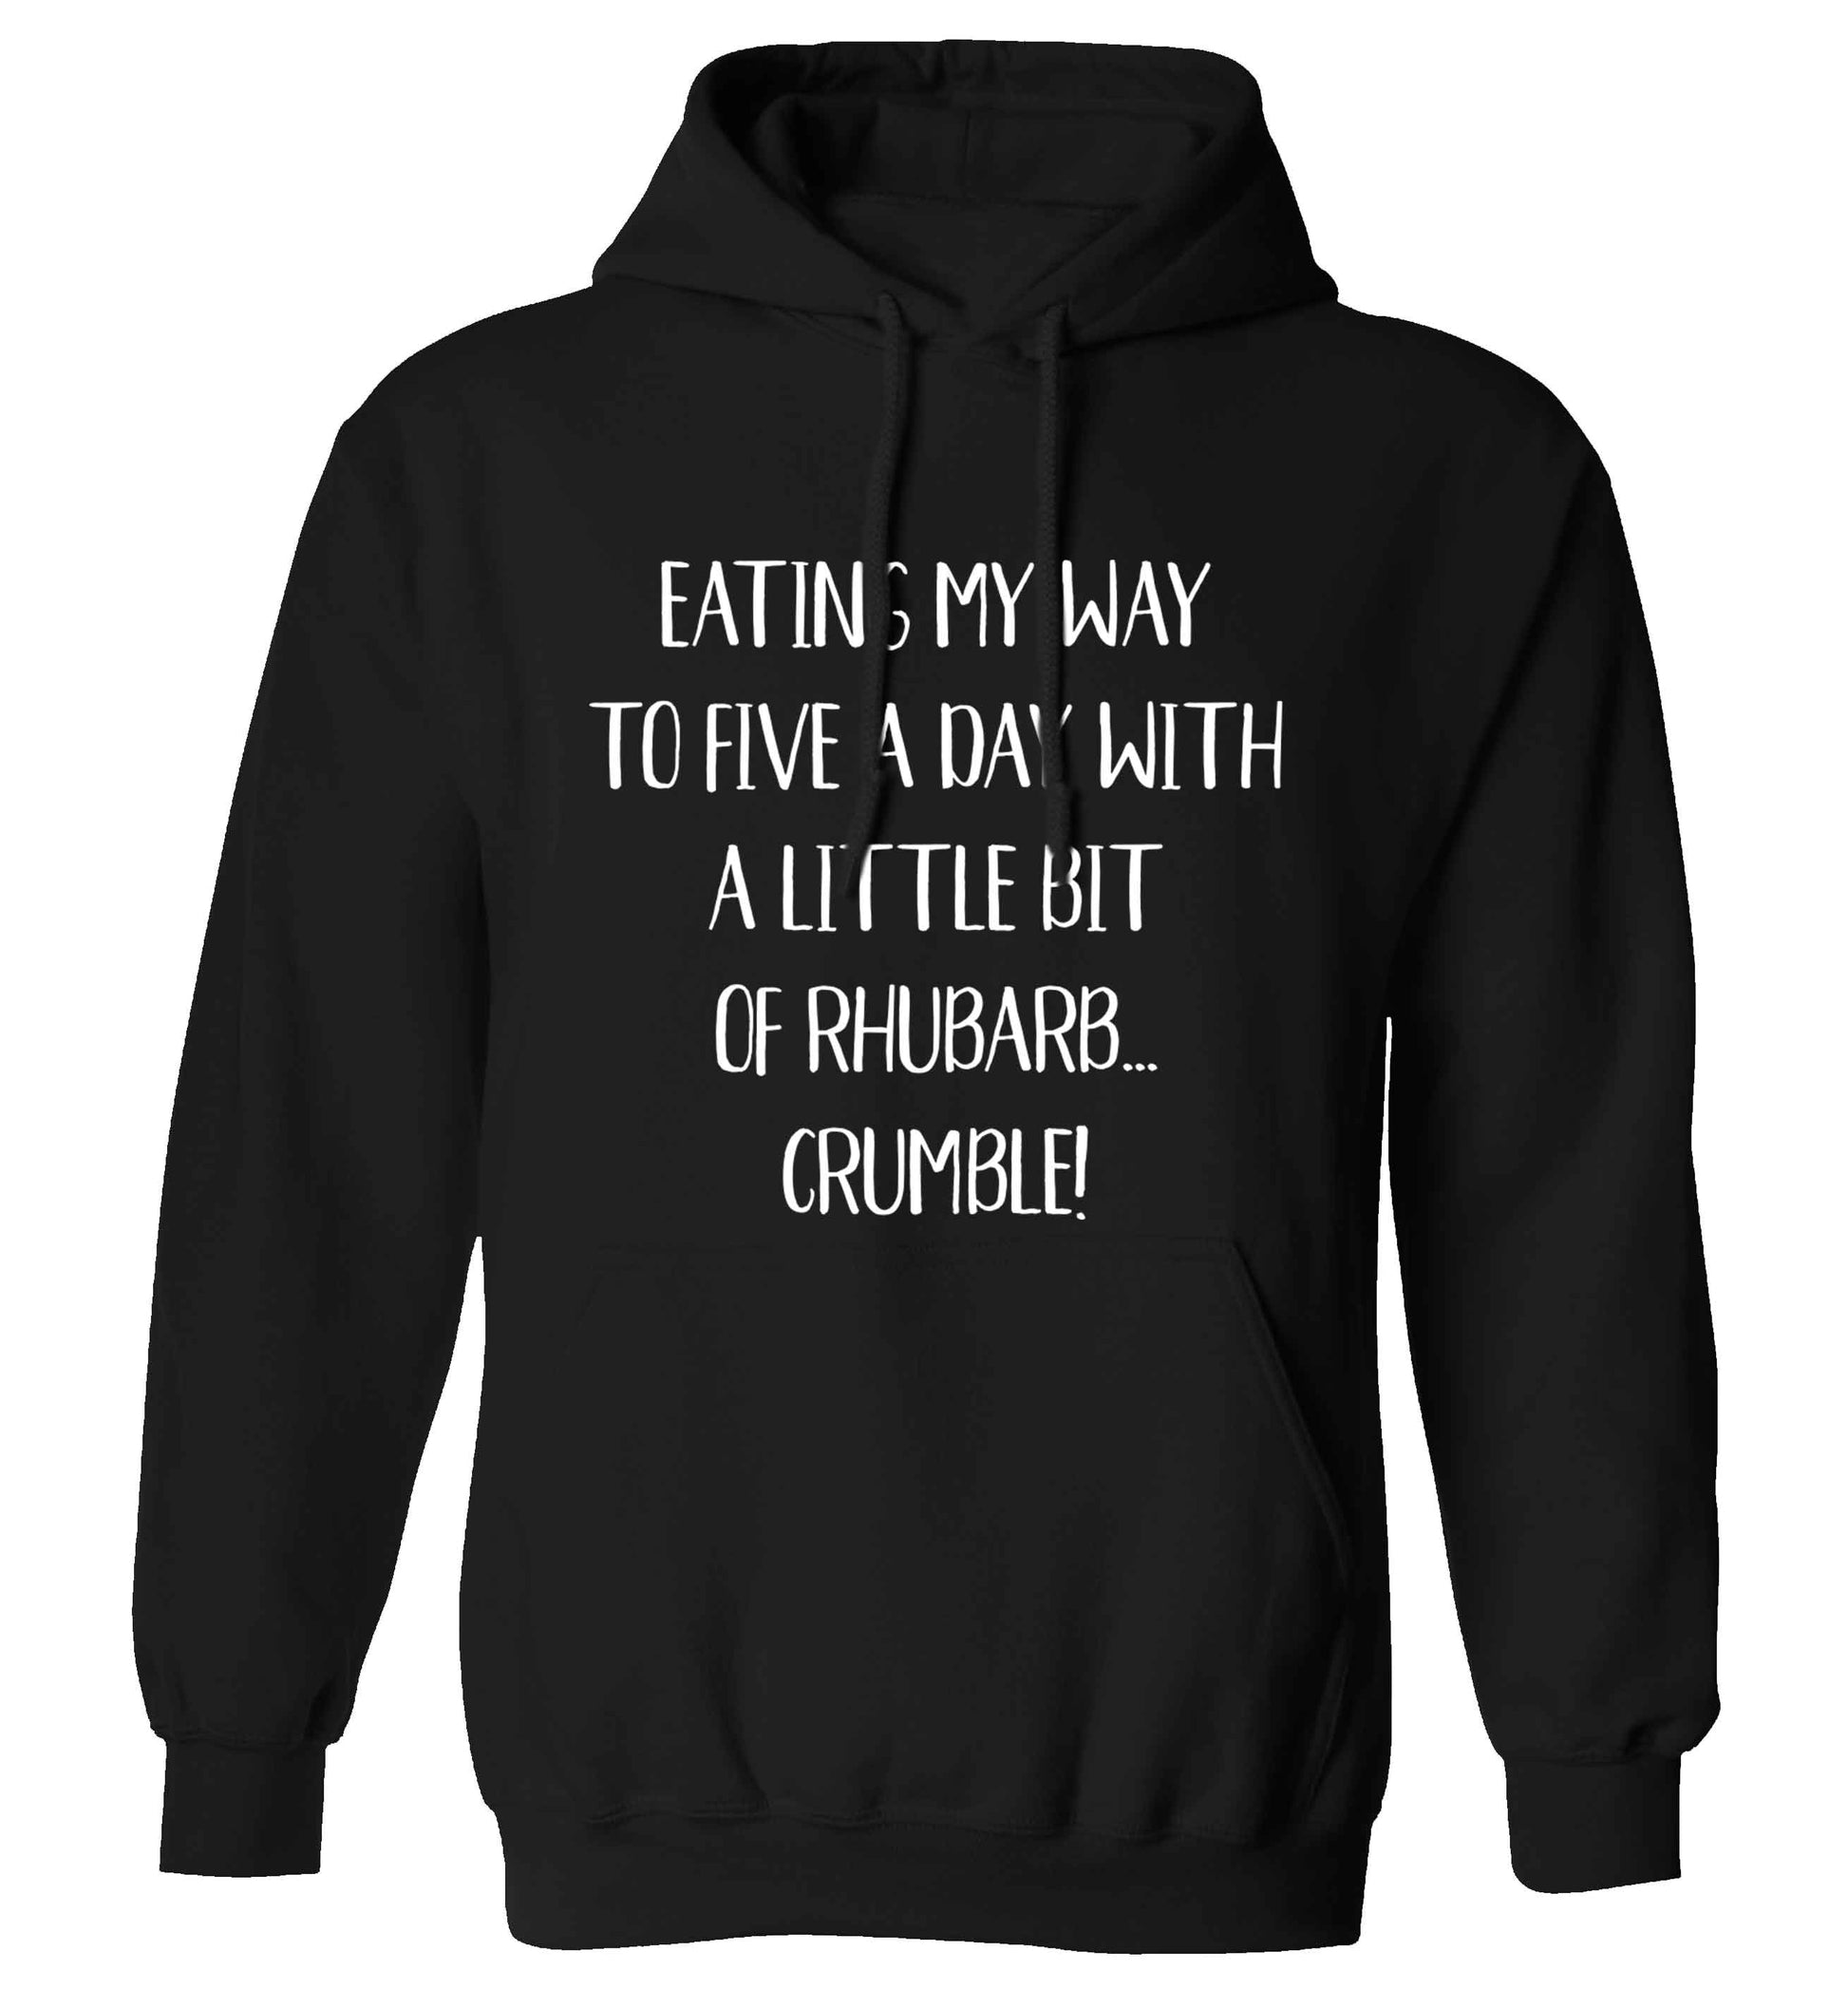 Eating my way to five a day with a little bit of rhubarb crumble adults unisex black hoodie 2XL